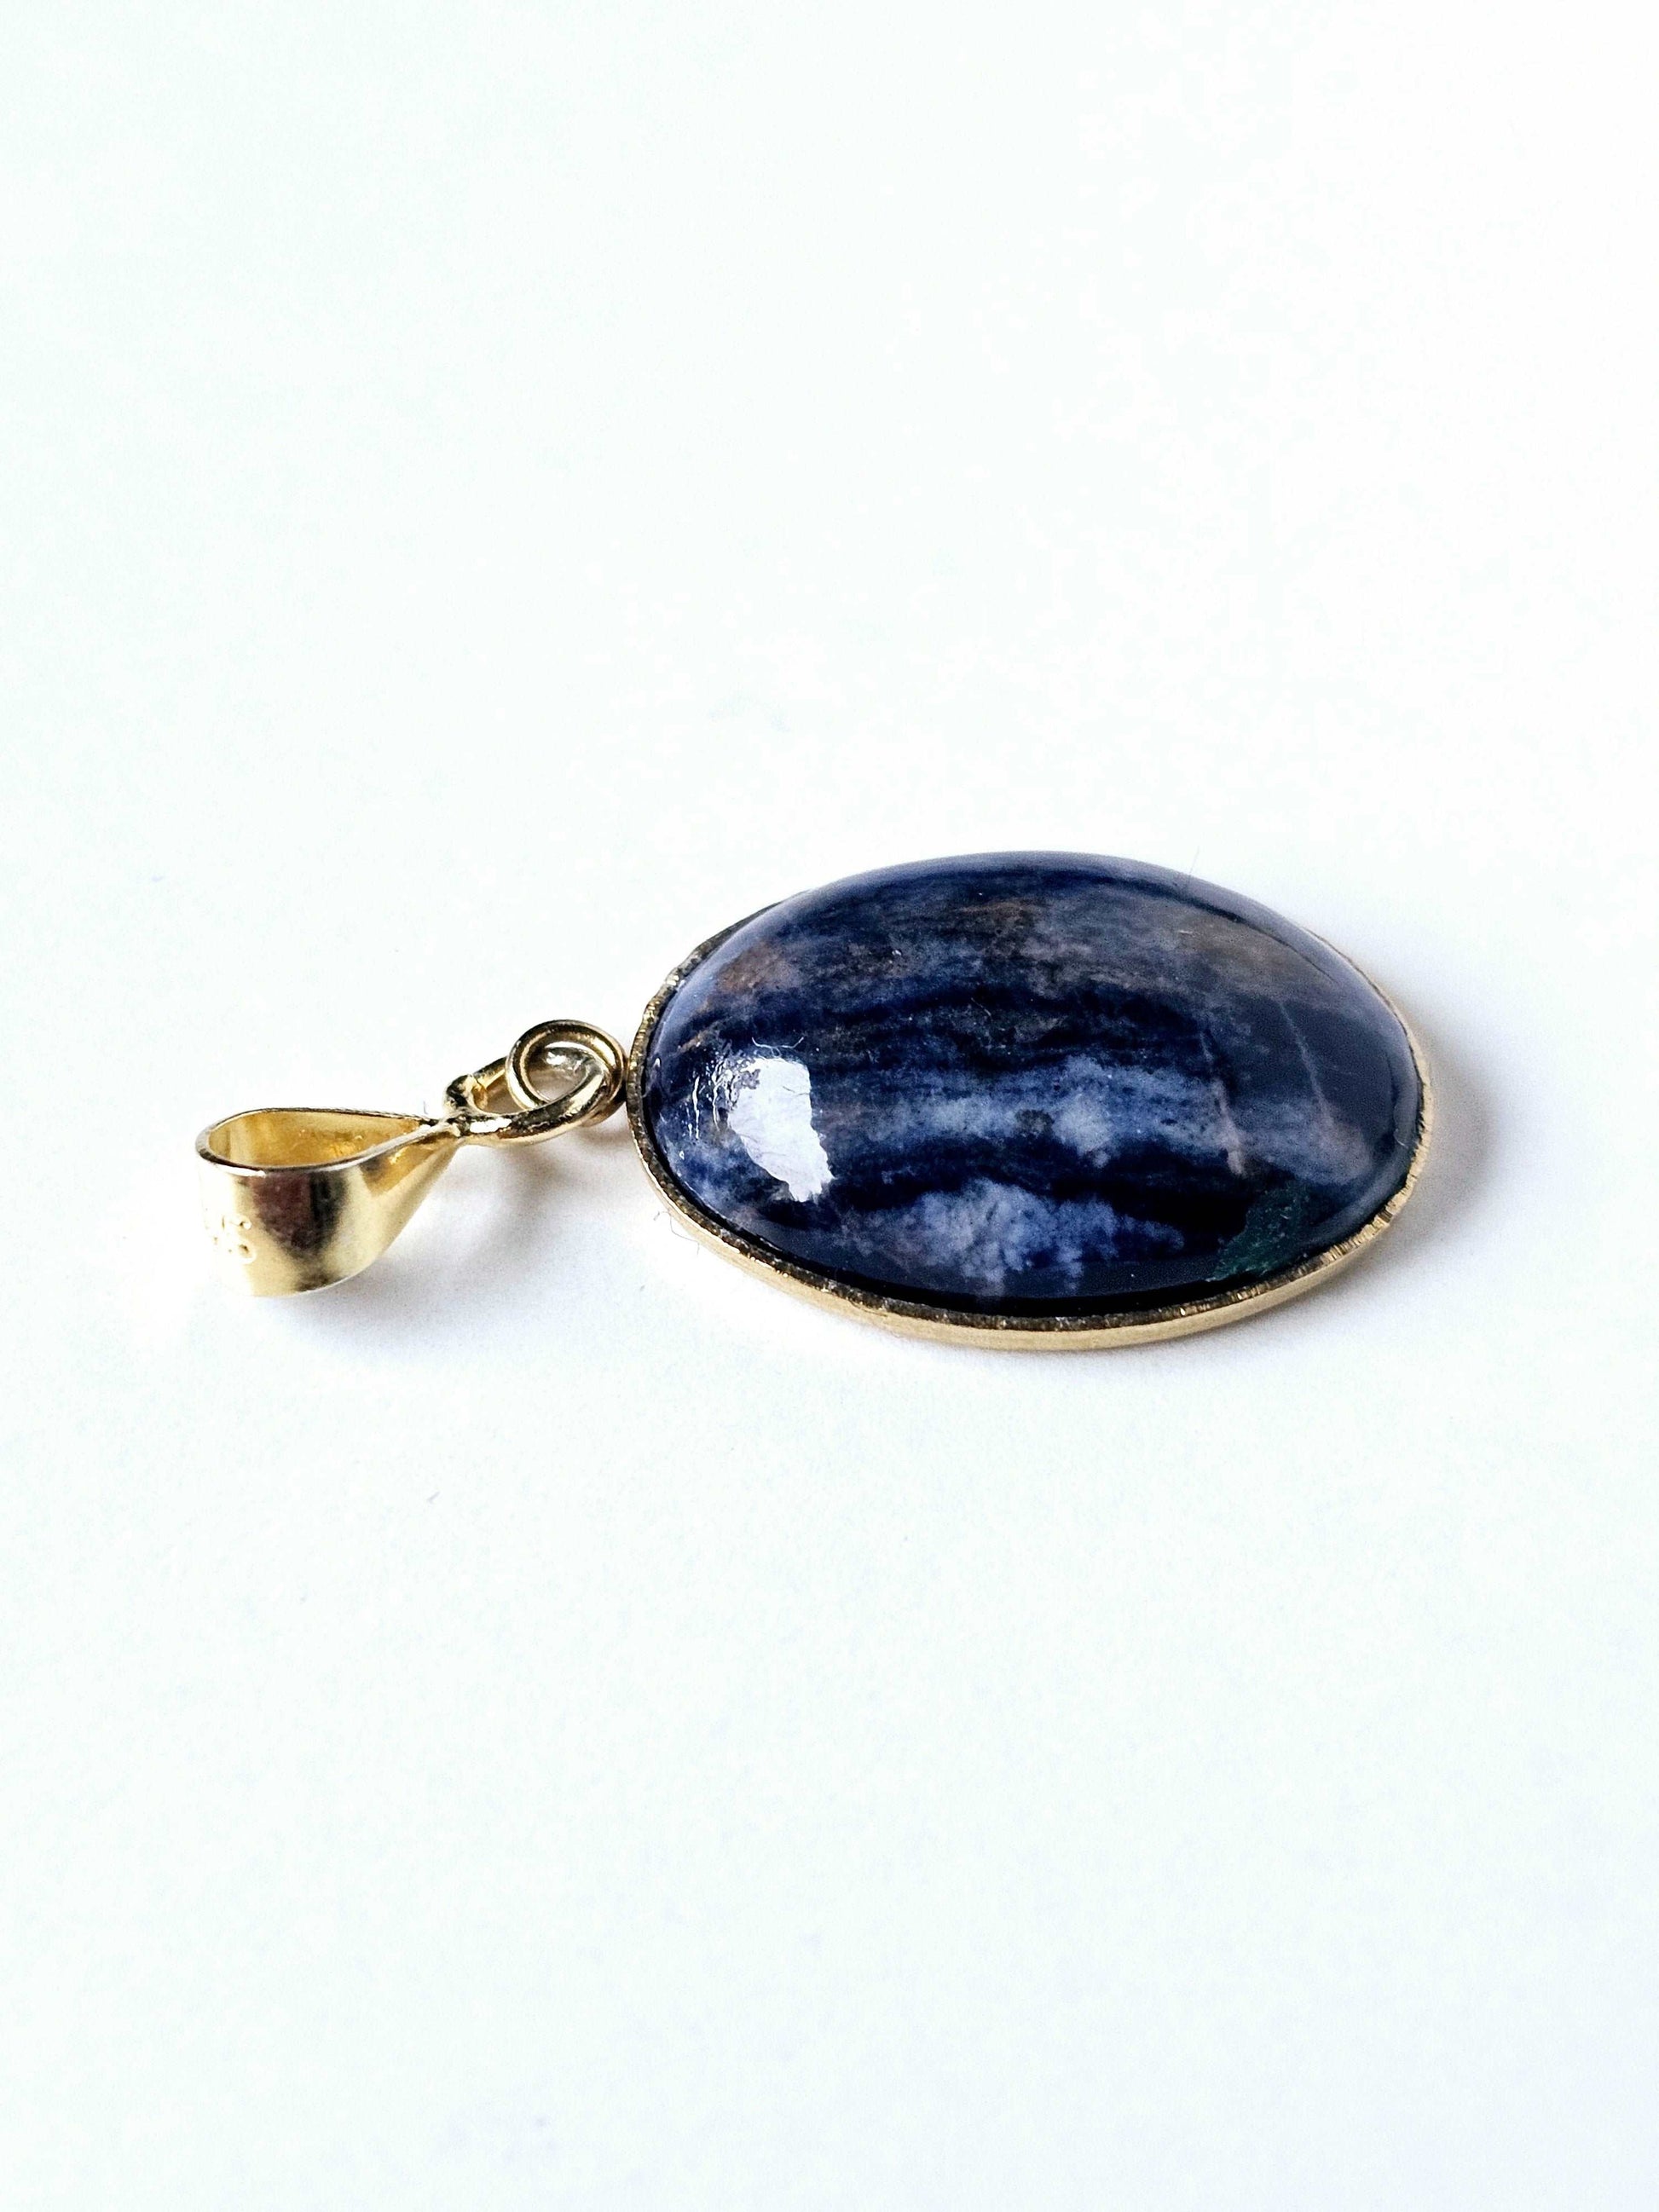 Elegant Gold Plated Pendant with Sodalite - Handcrafted Statement Jewelry Scandinavian Gem Design